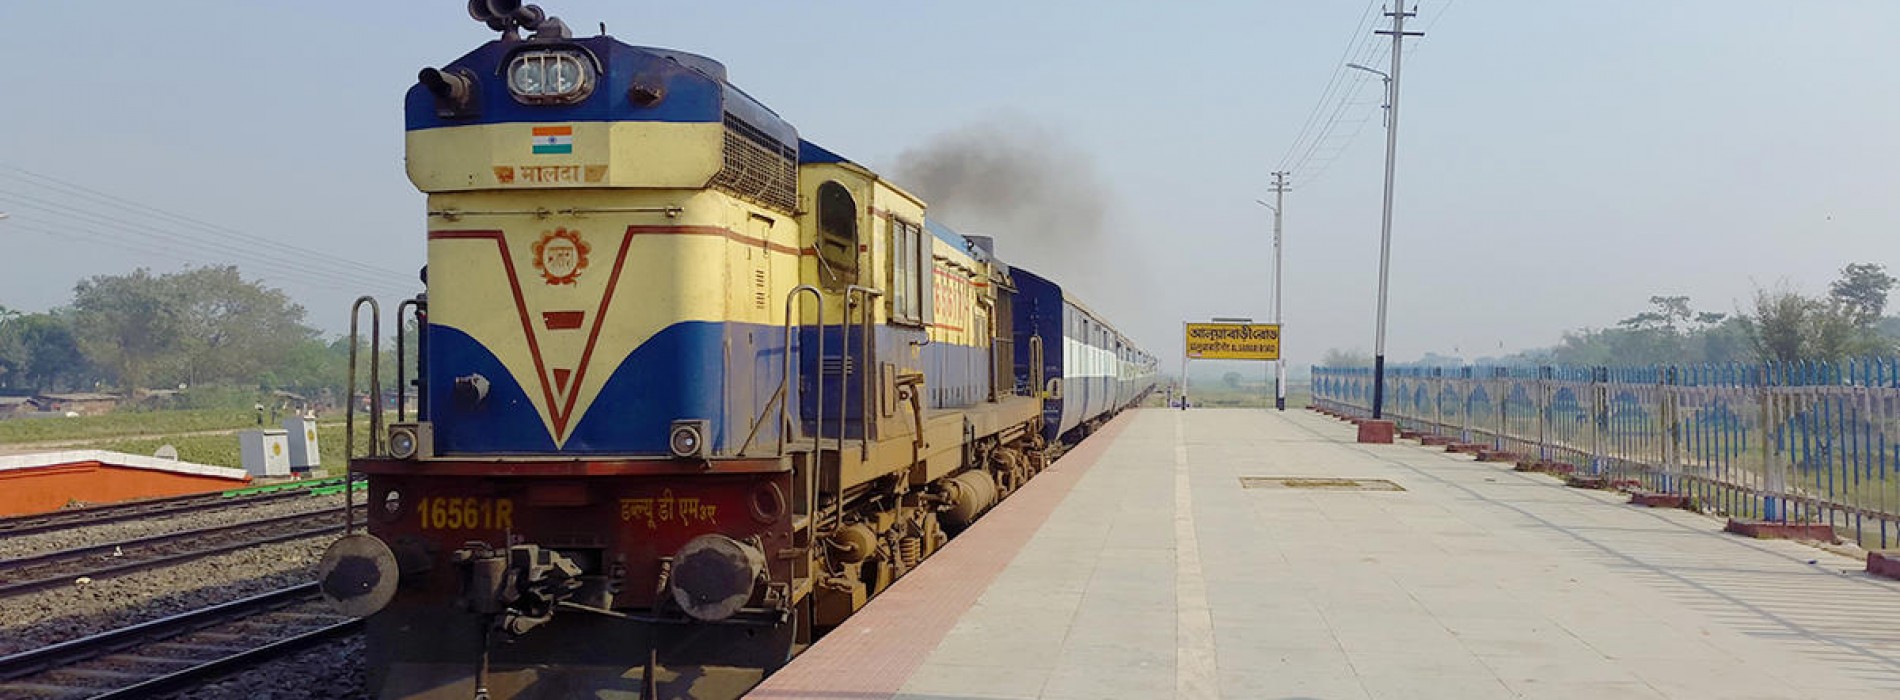 Indian Railway’s Mail/Express trains to sport new look